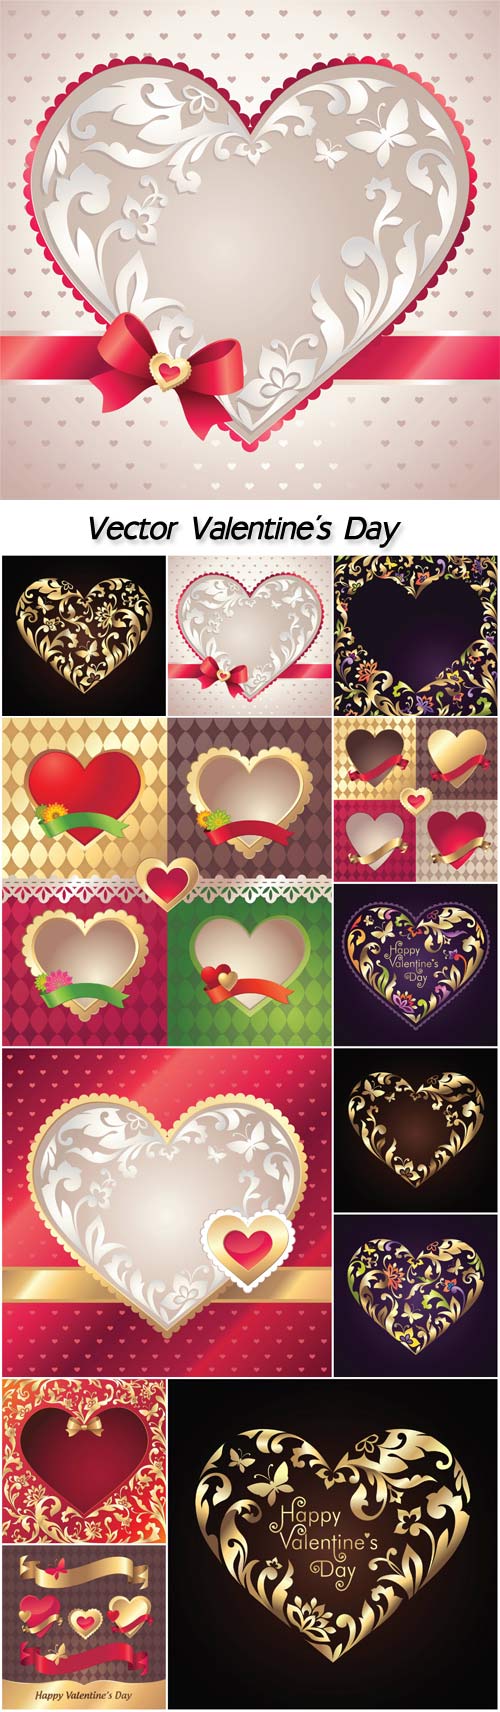 Vector Valentine's Day, hearts with patterns